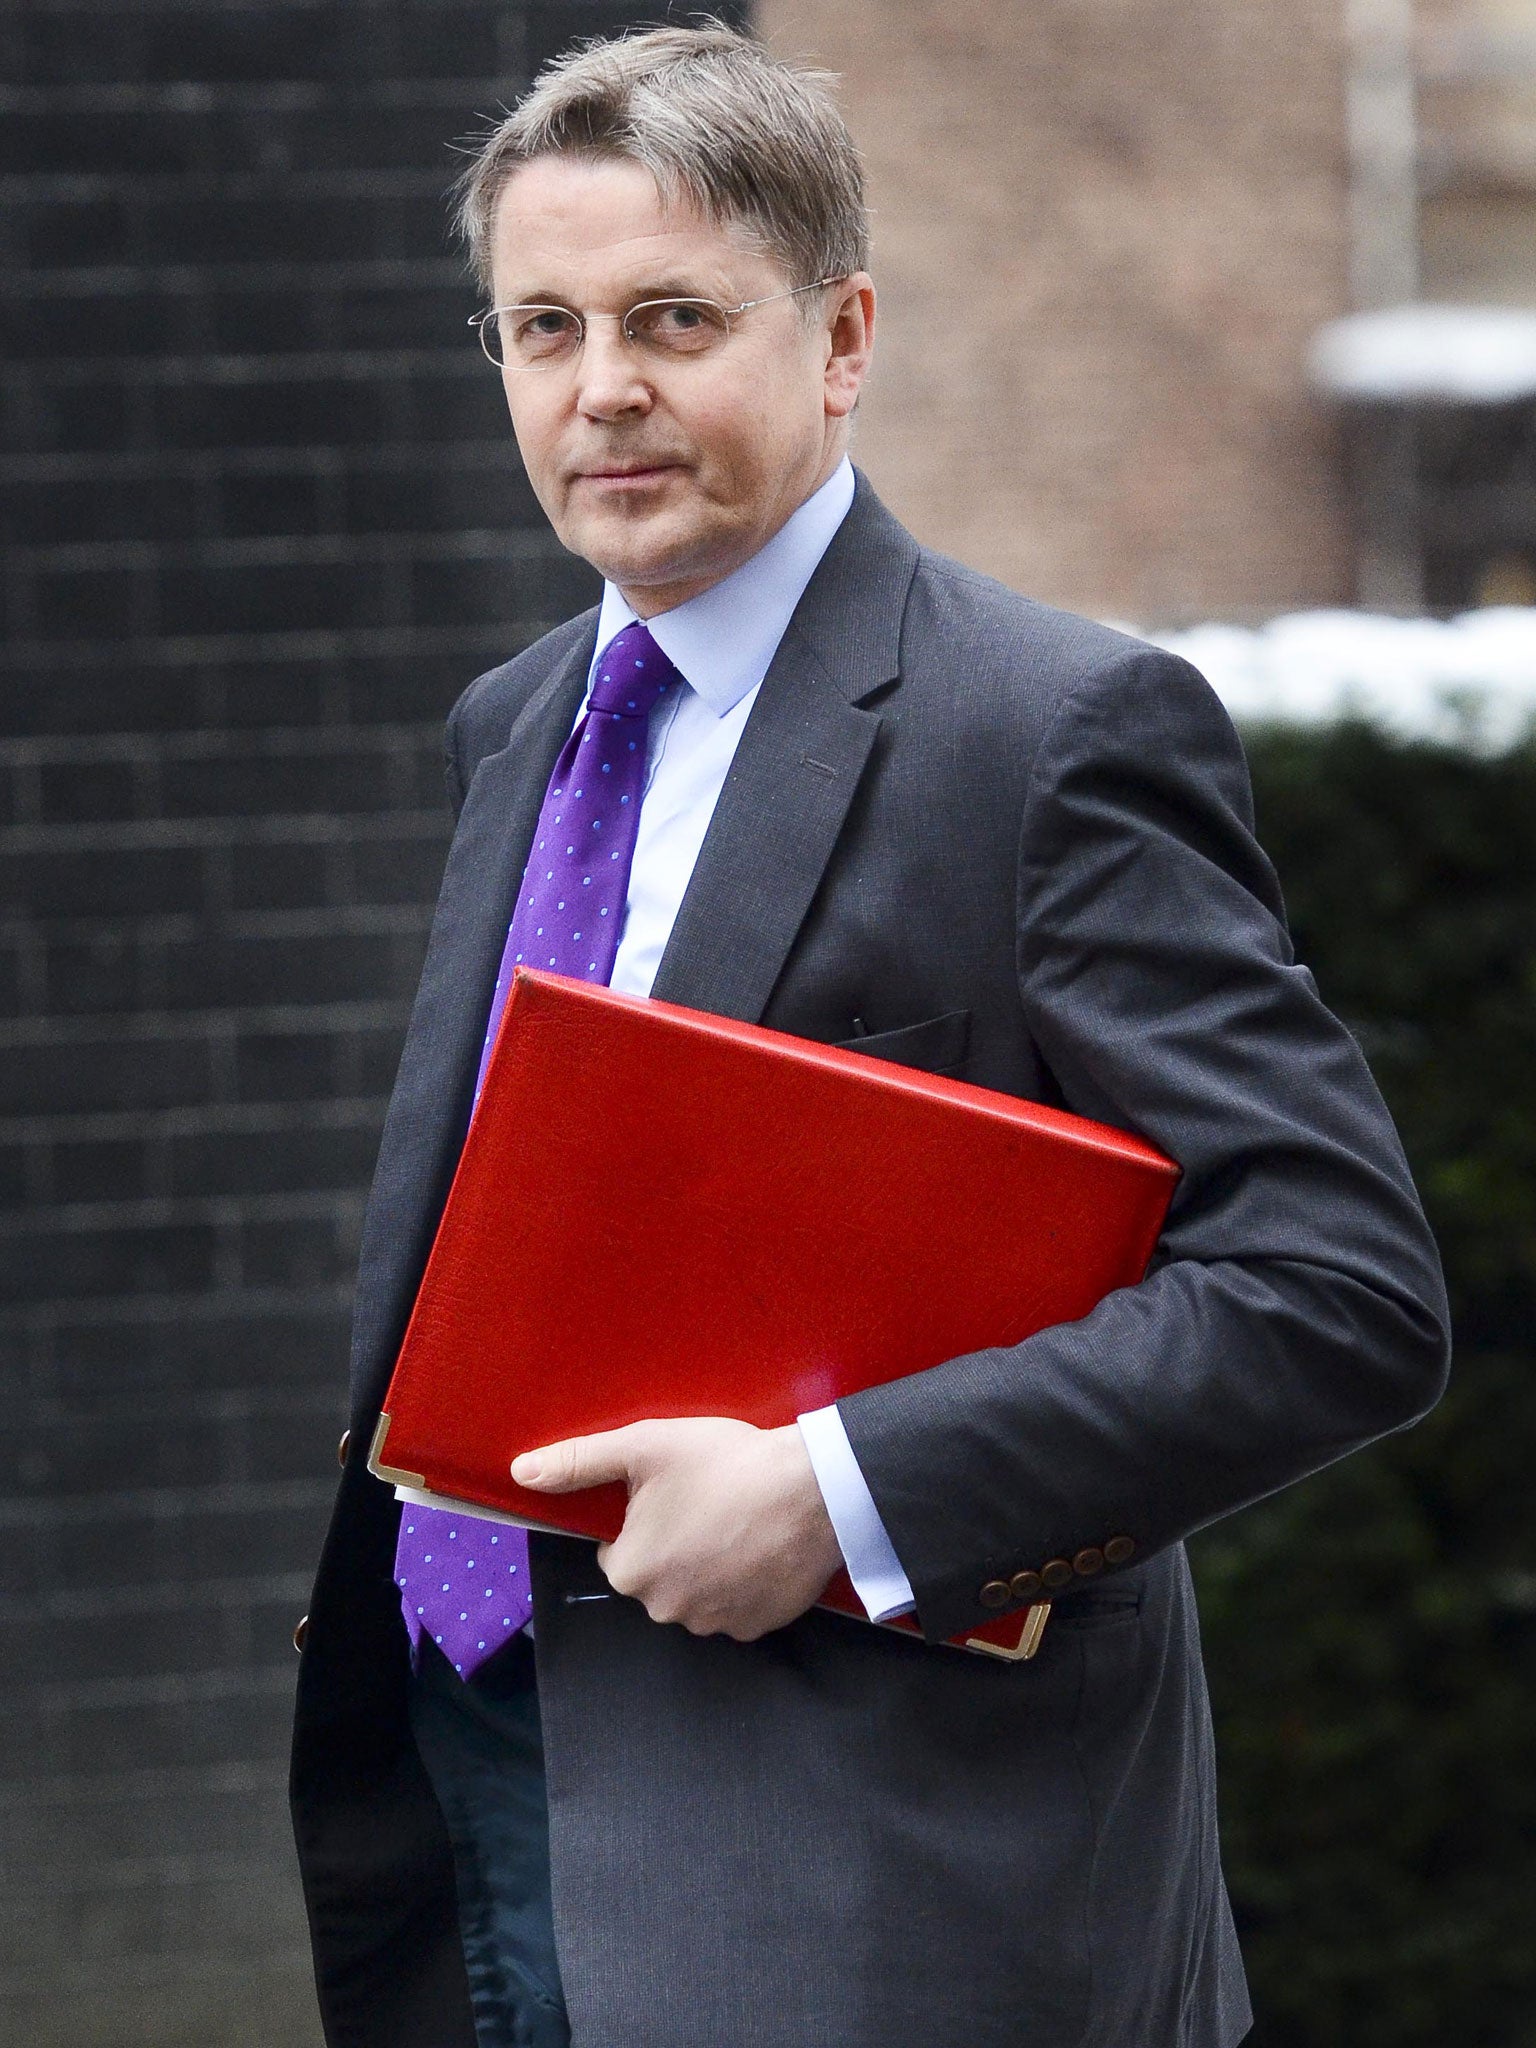 Sir Jeremy Heywood’s £25,000 tax perk was also revealed